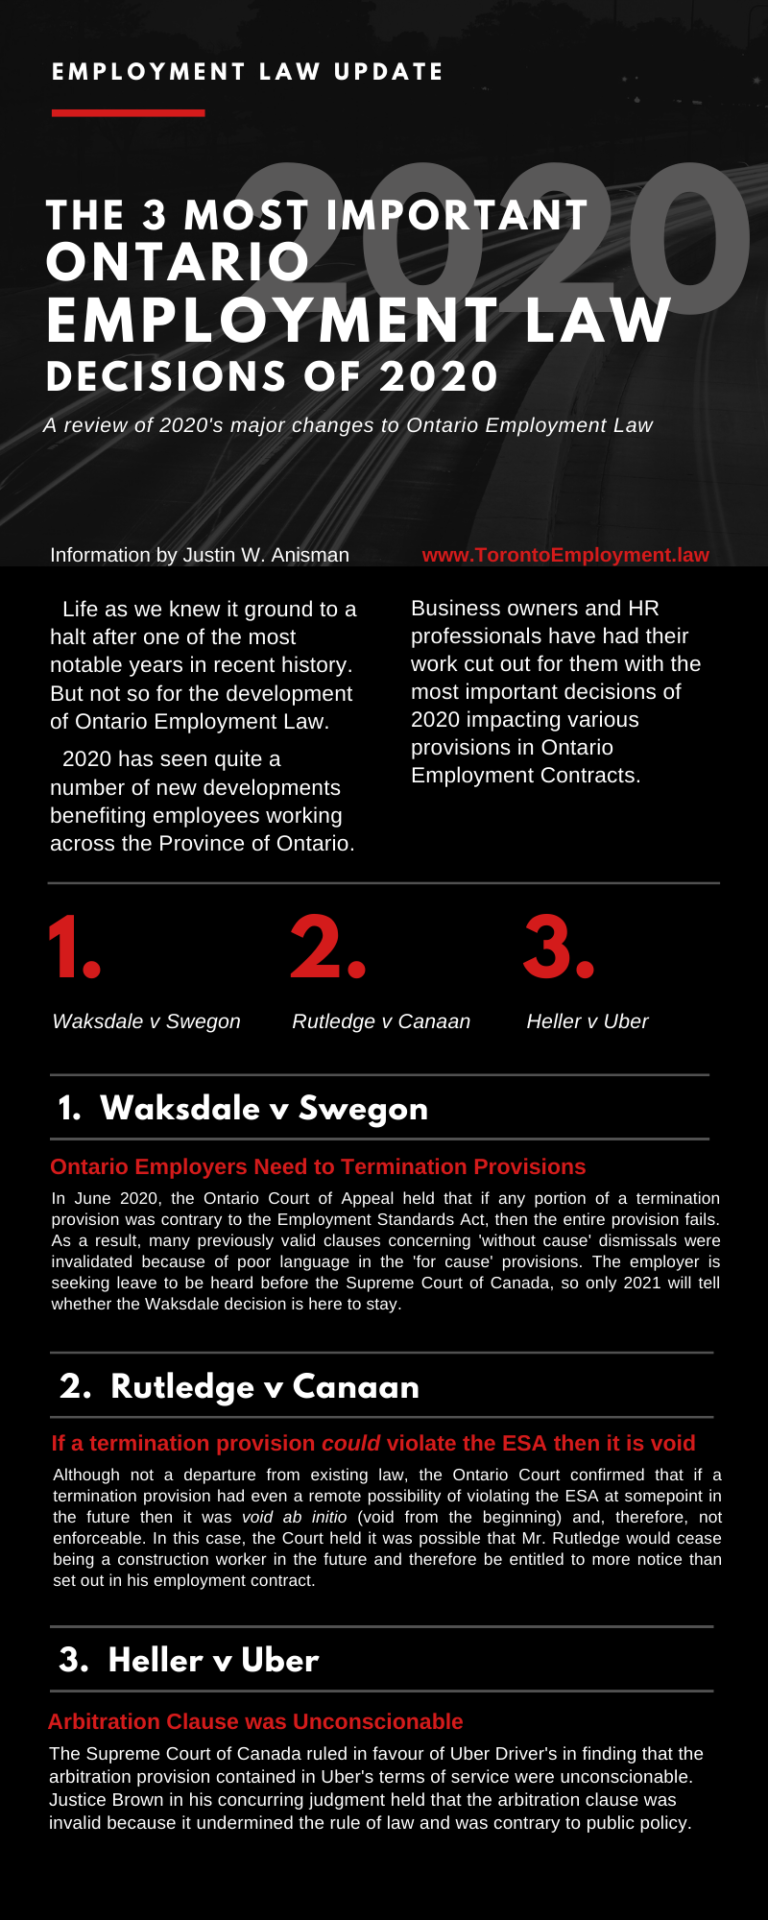 Infographic summarizing the 3 most important Ontario employment law decisions of 2020.